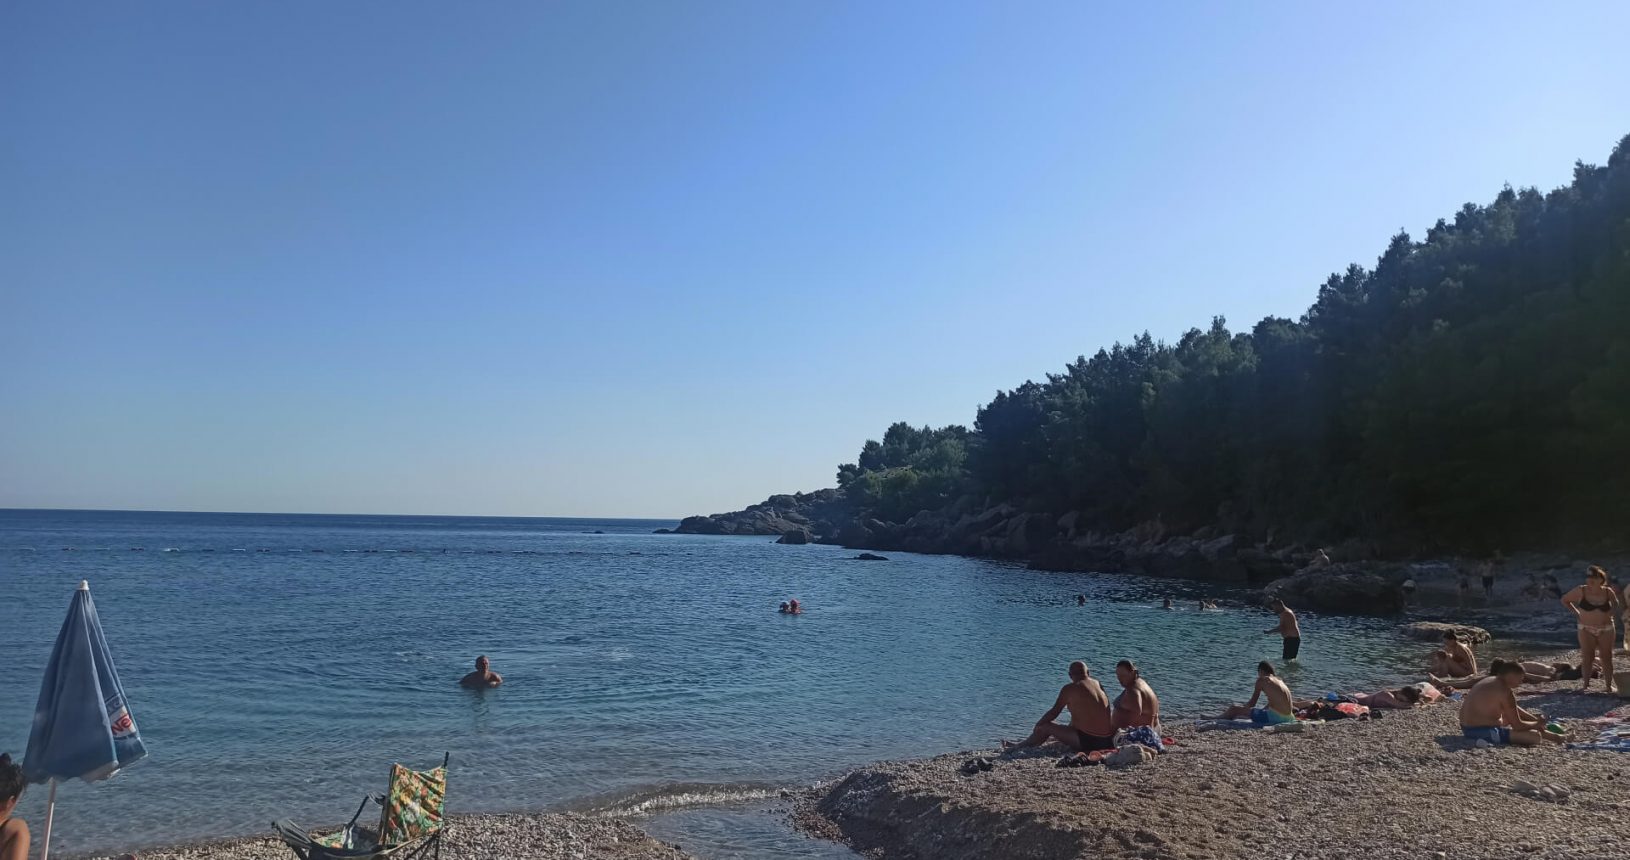 Two sizes of the sea at Strbina Beach